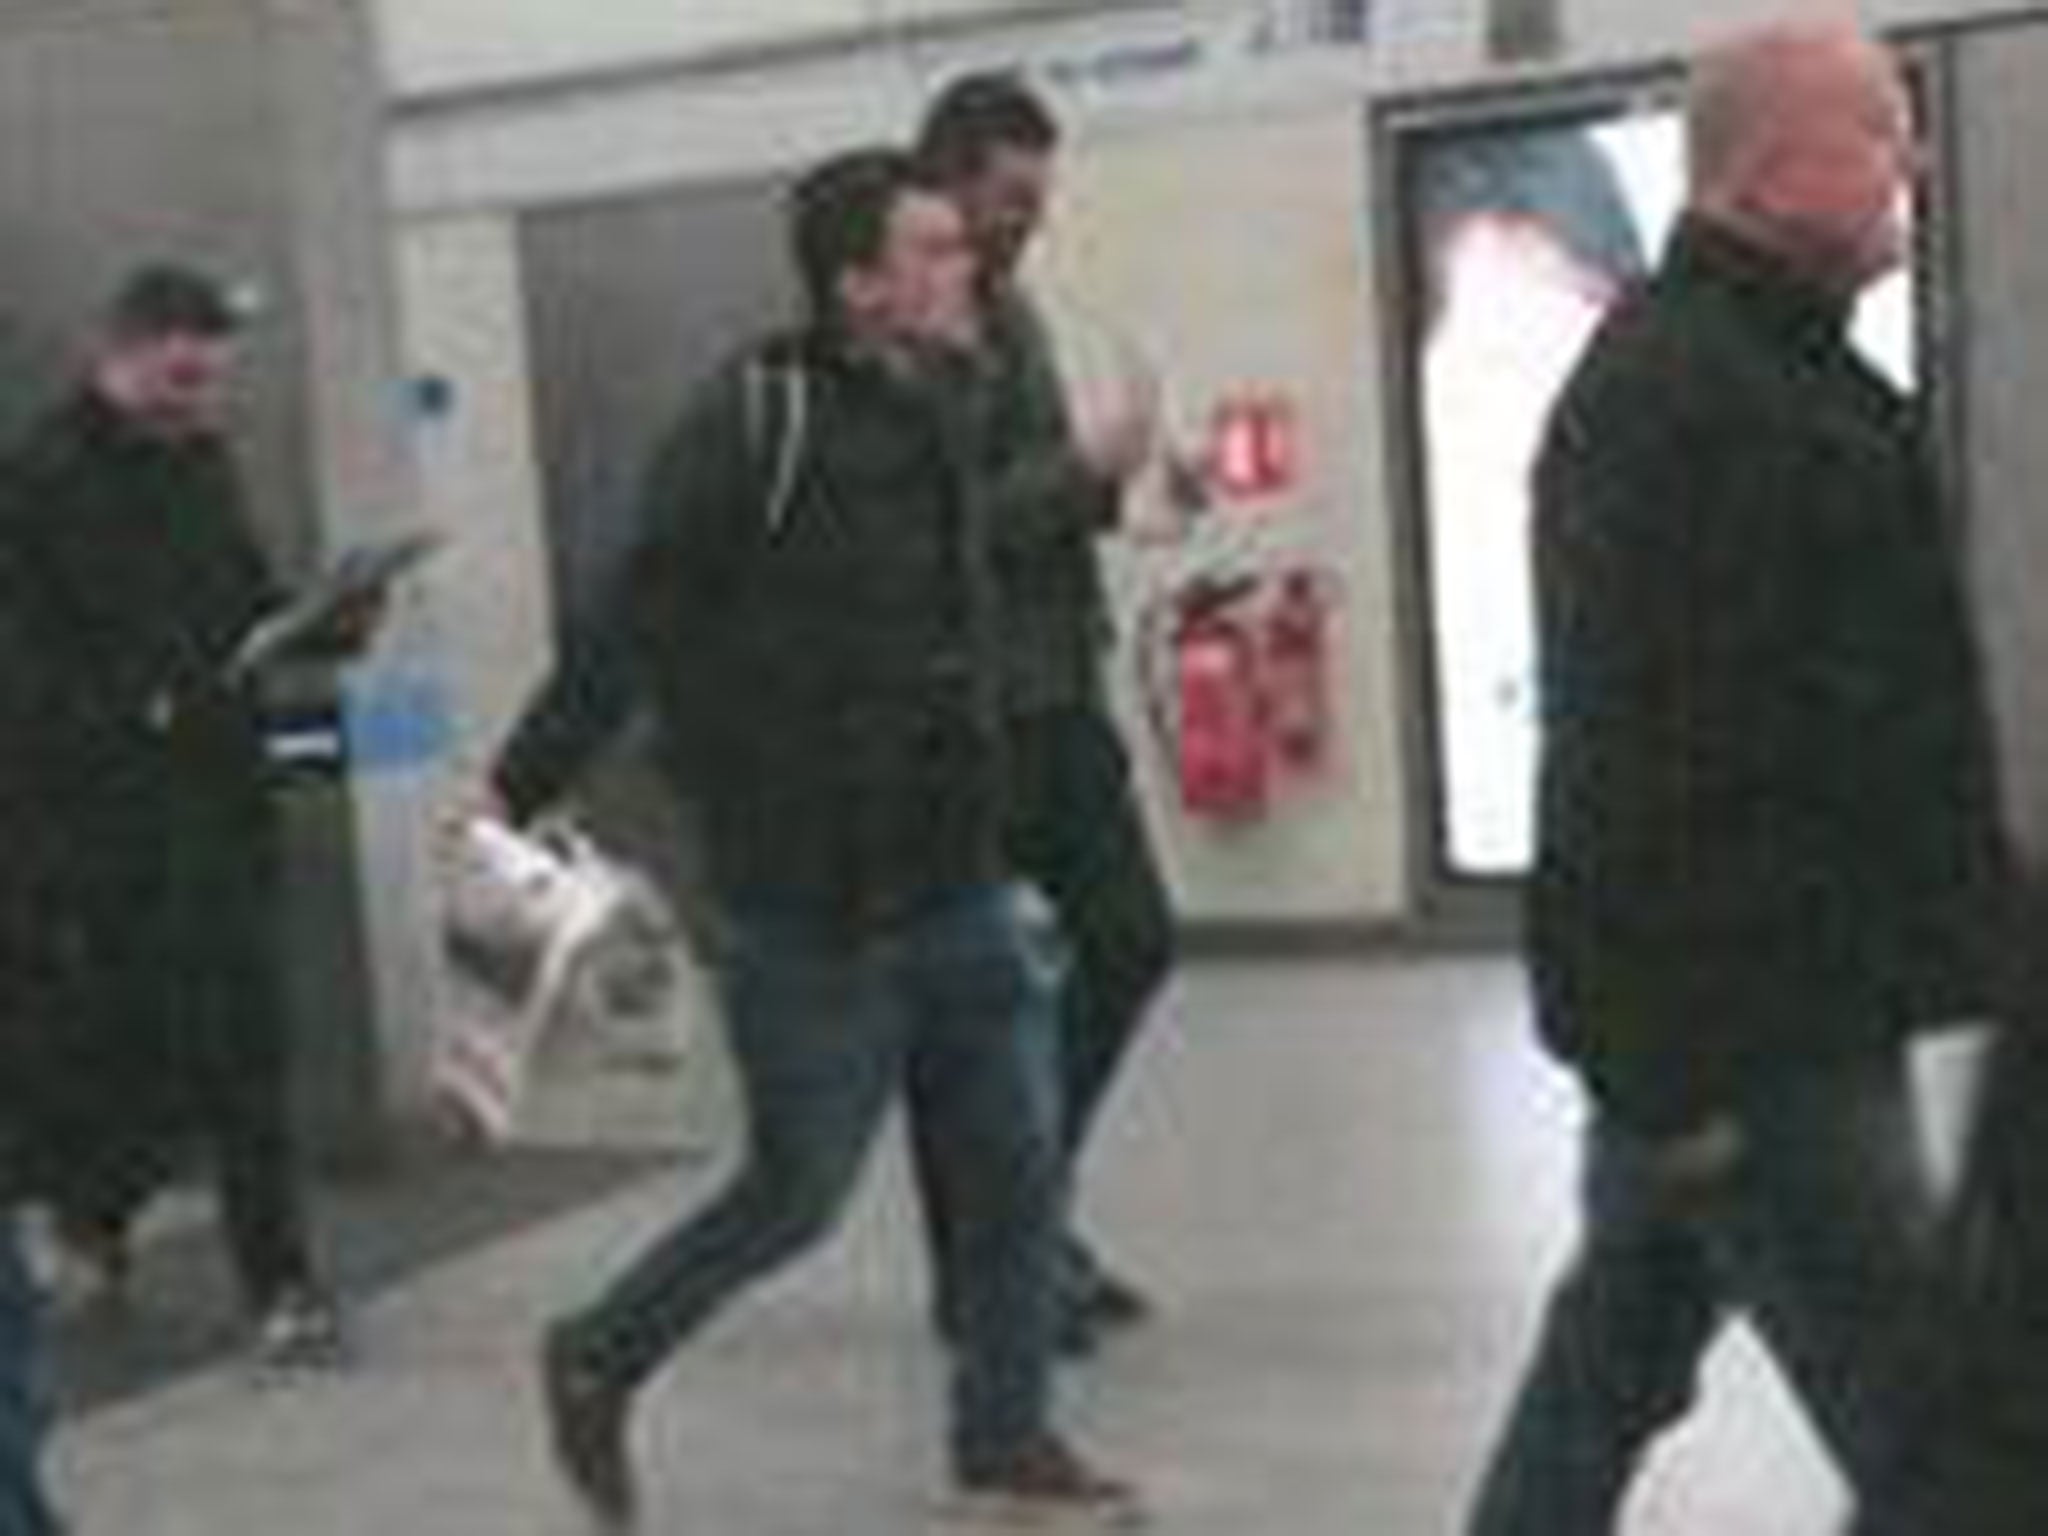 British Transport Police have released images of seven men they would like to speak to in connection with alleged racist chanting at St Pancras station in London on Wednesday, 18 February